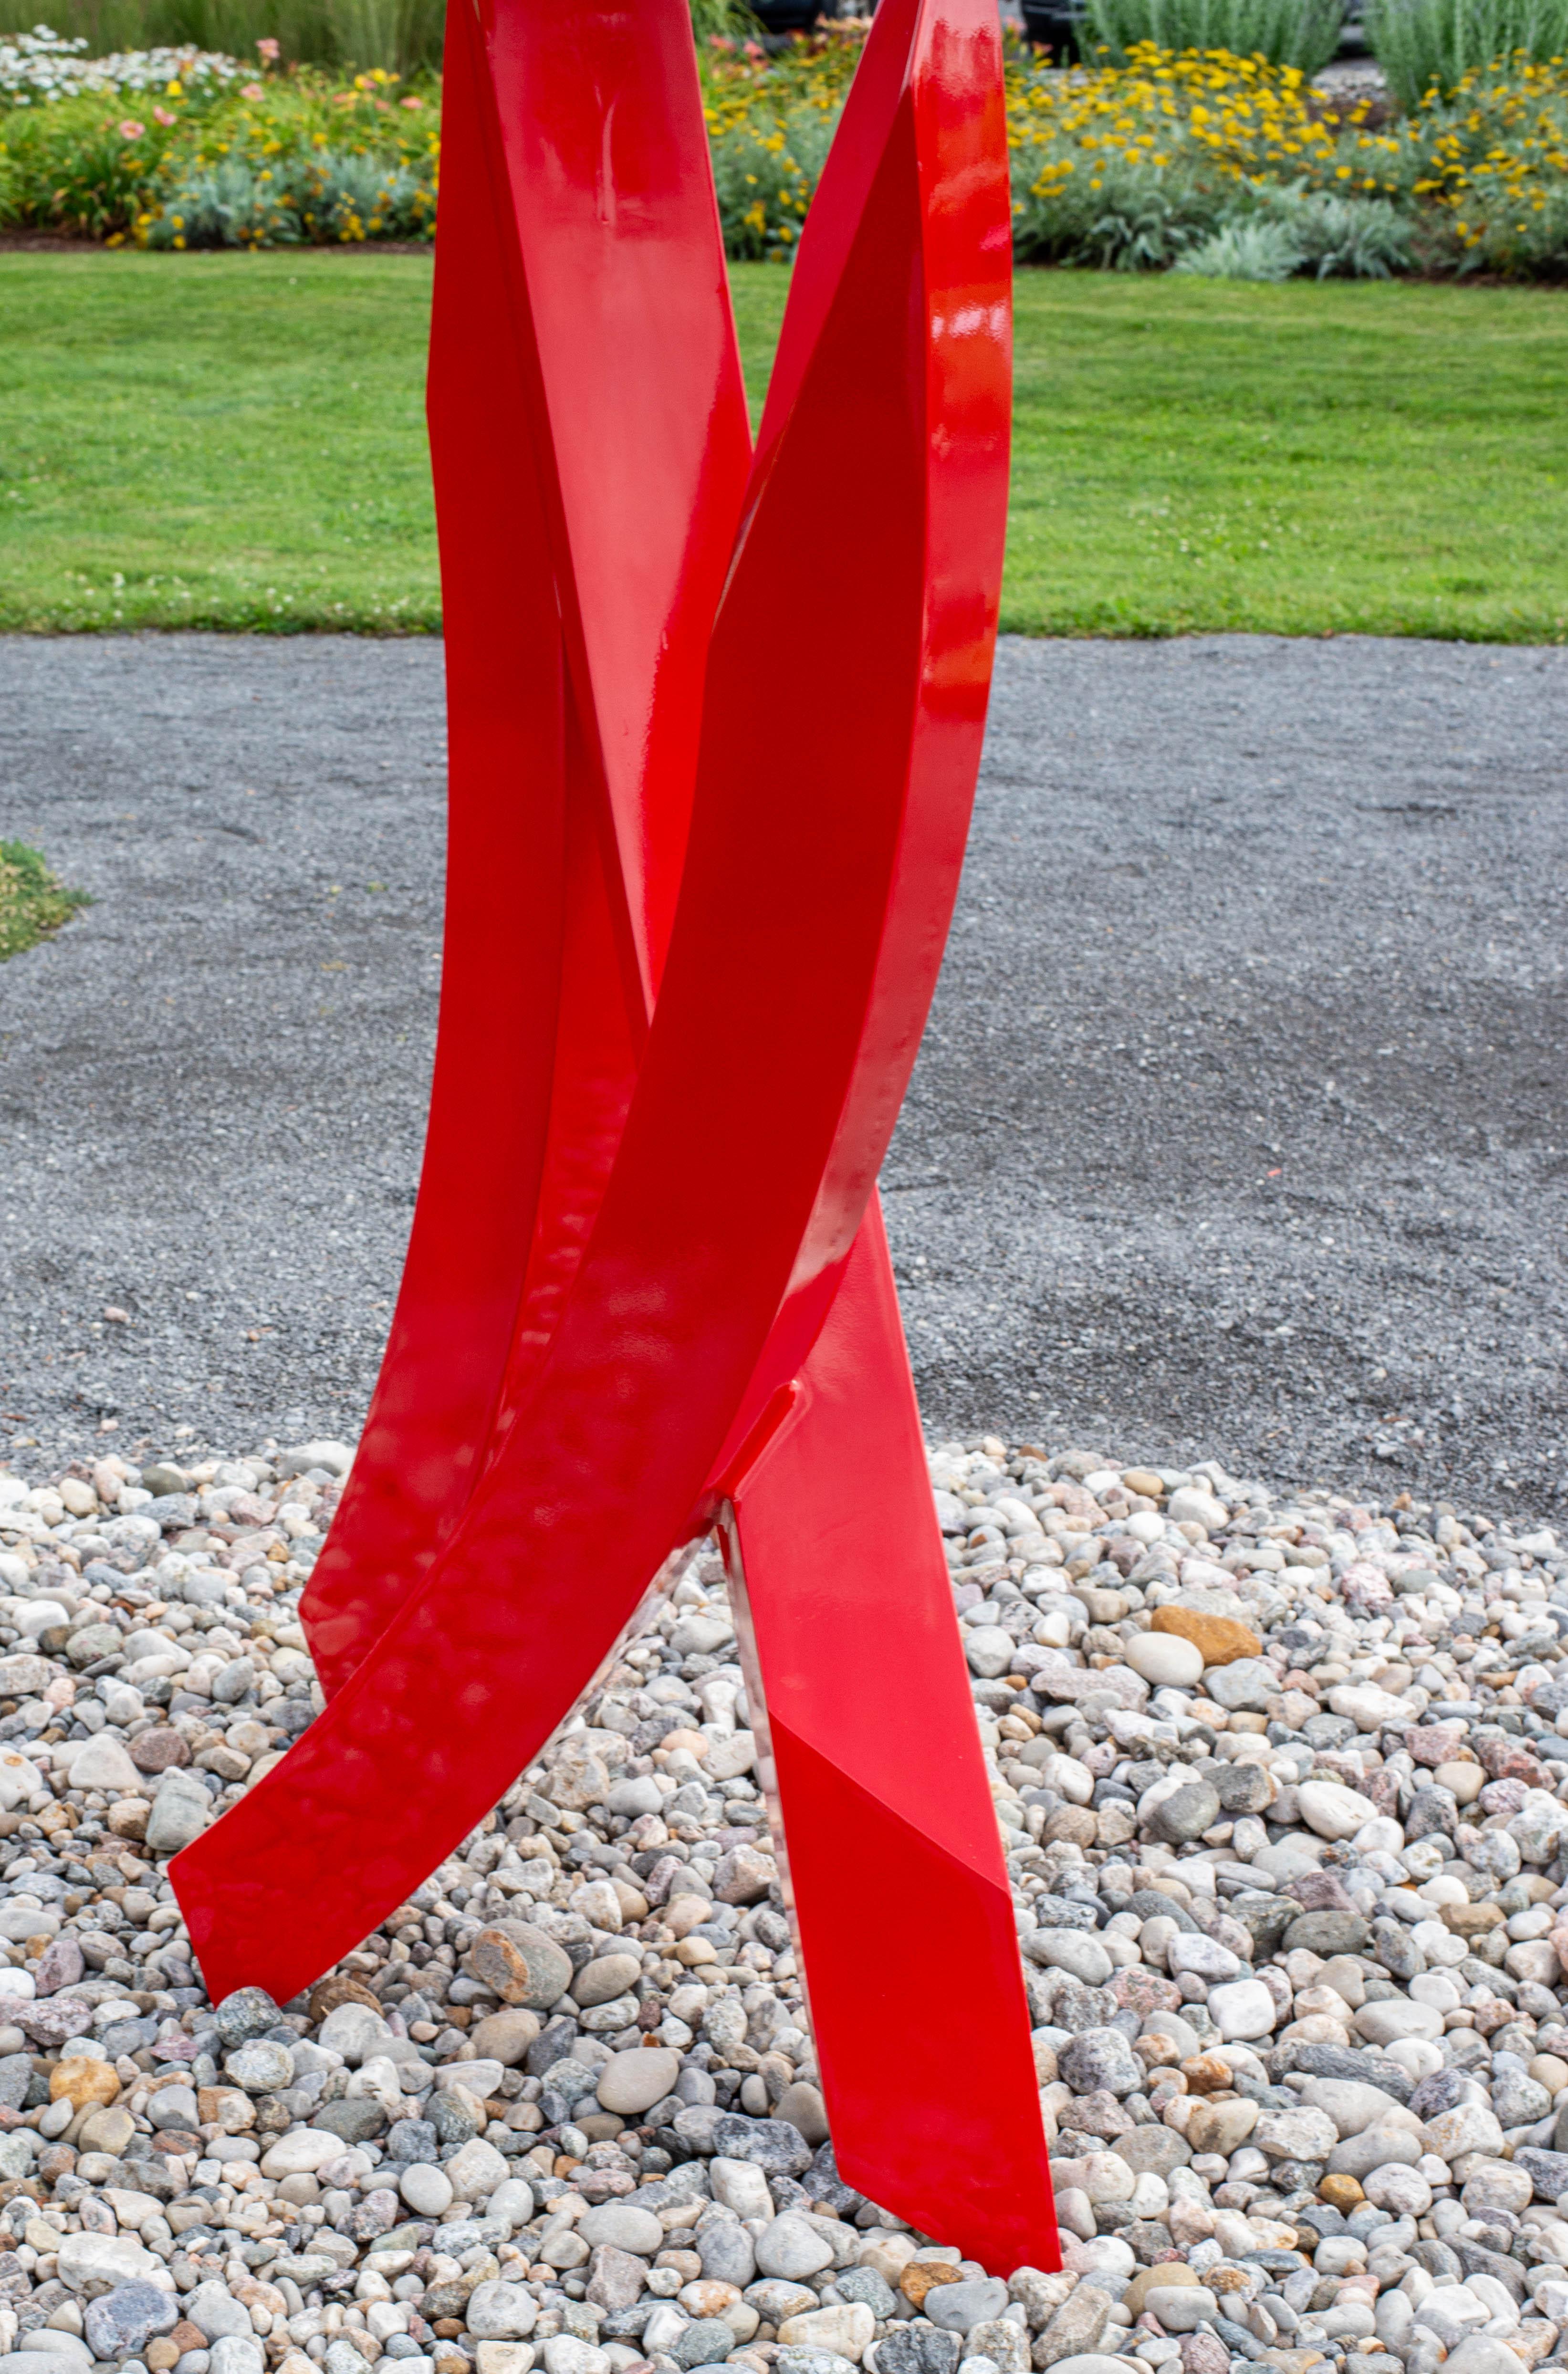 Summer Red Rhythm - contemporary, abstract, stainless steel outdoor sculpture For Sale 11